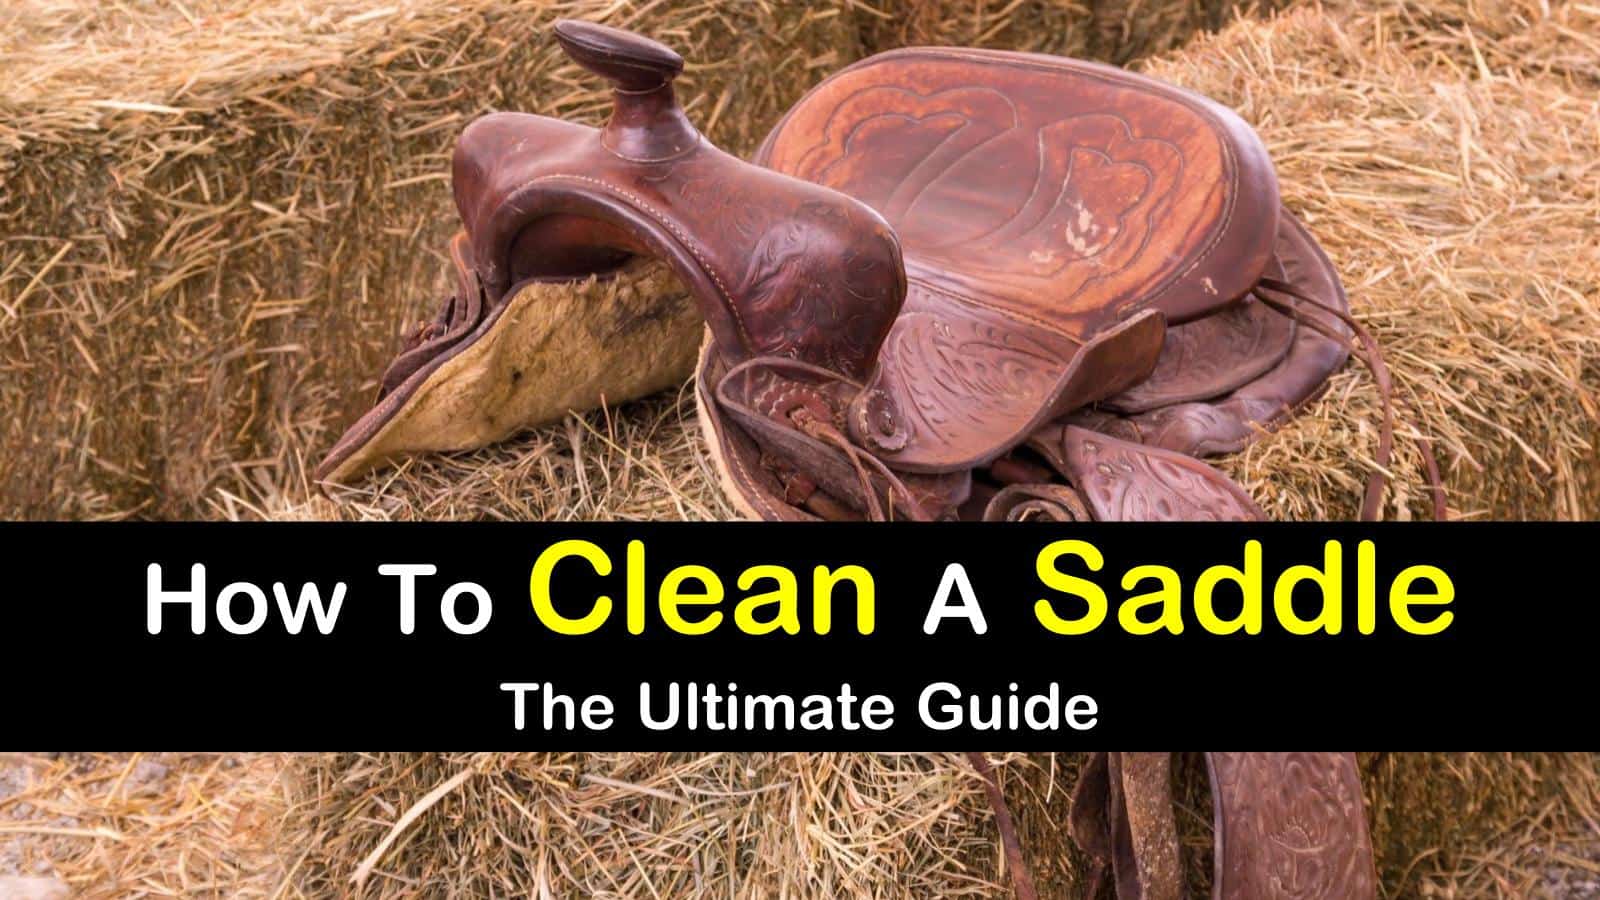 How To Clean A Saddle titleimg1